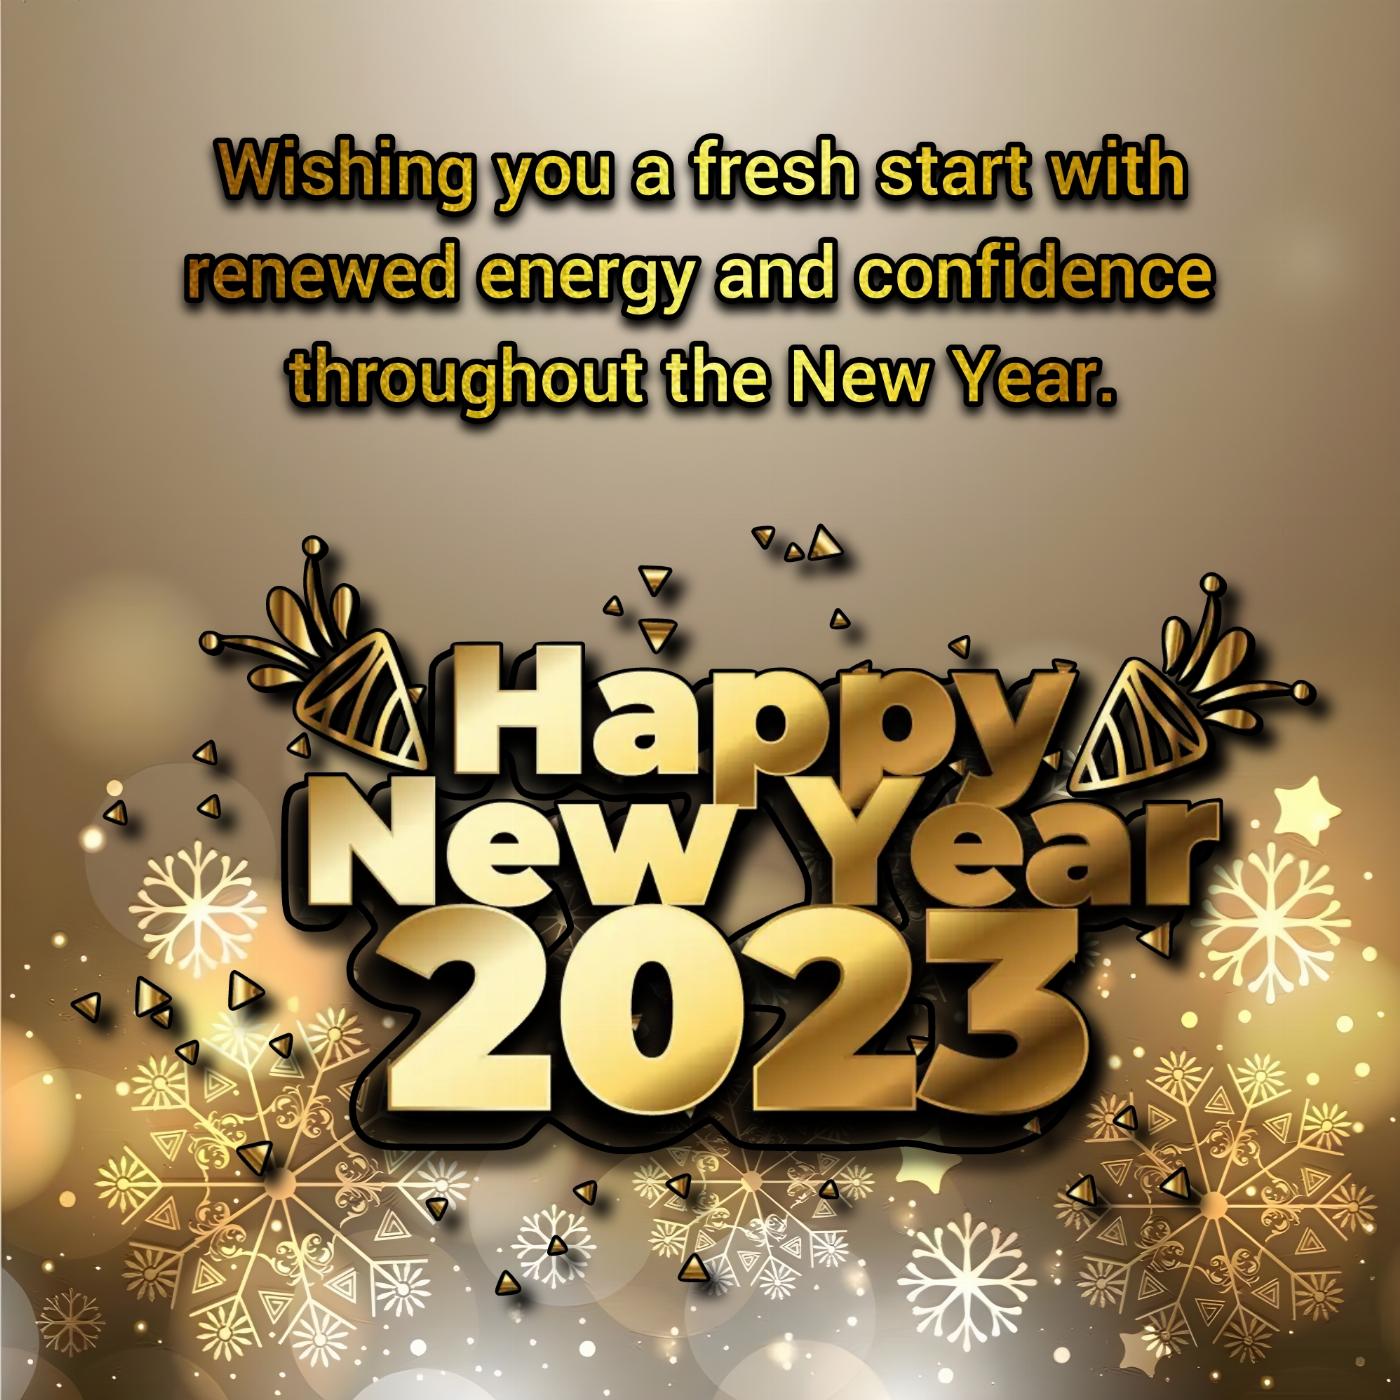 Wishing you a fresh start with renewed energy and confidence